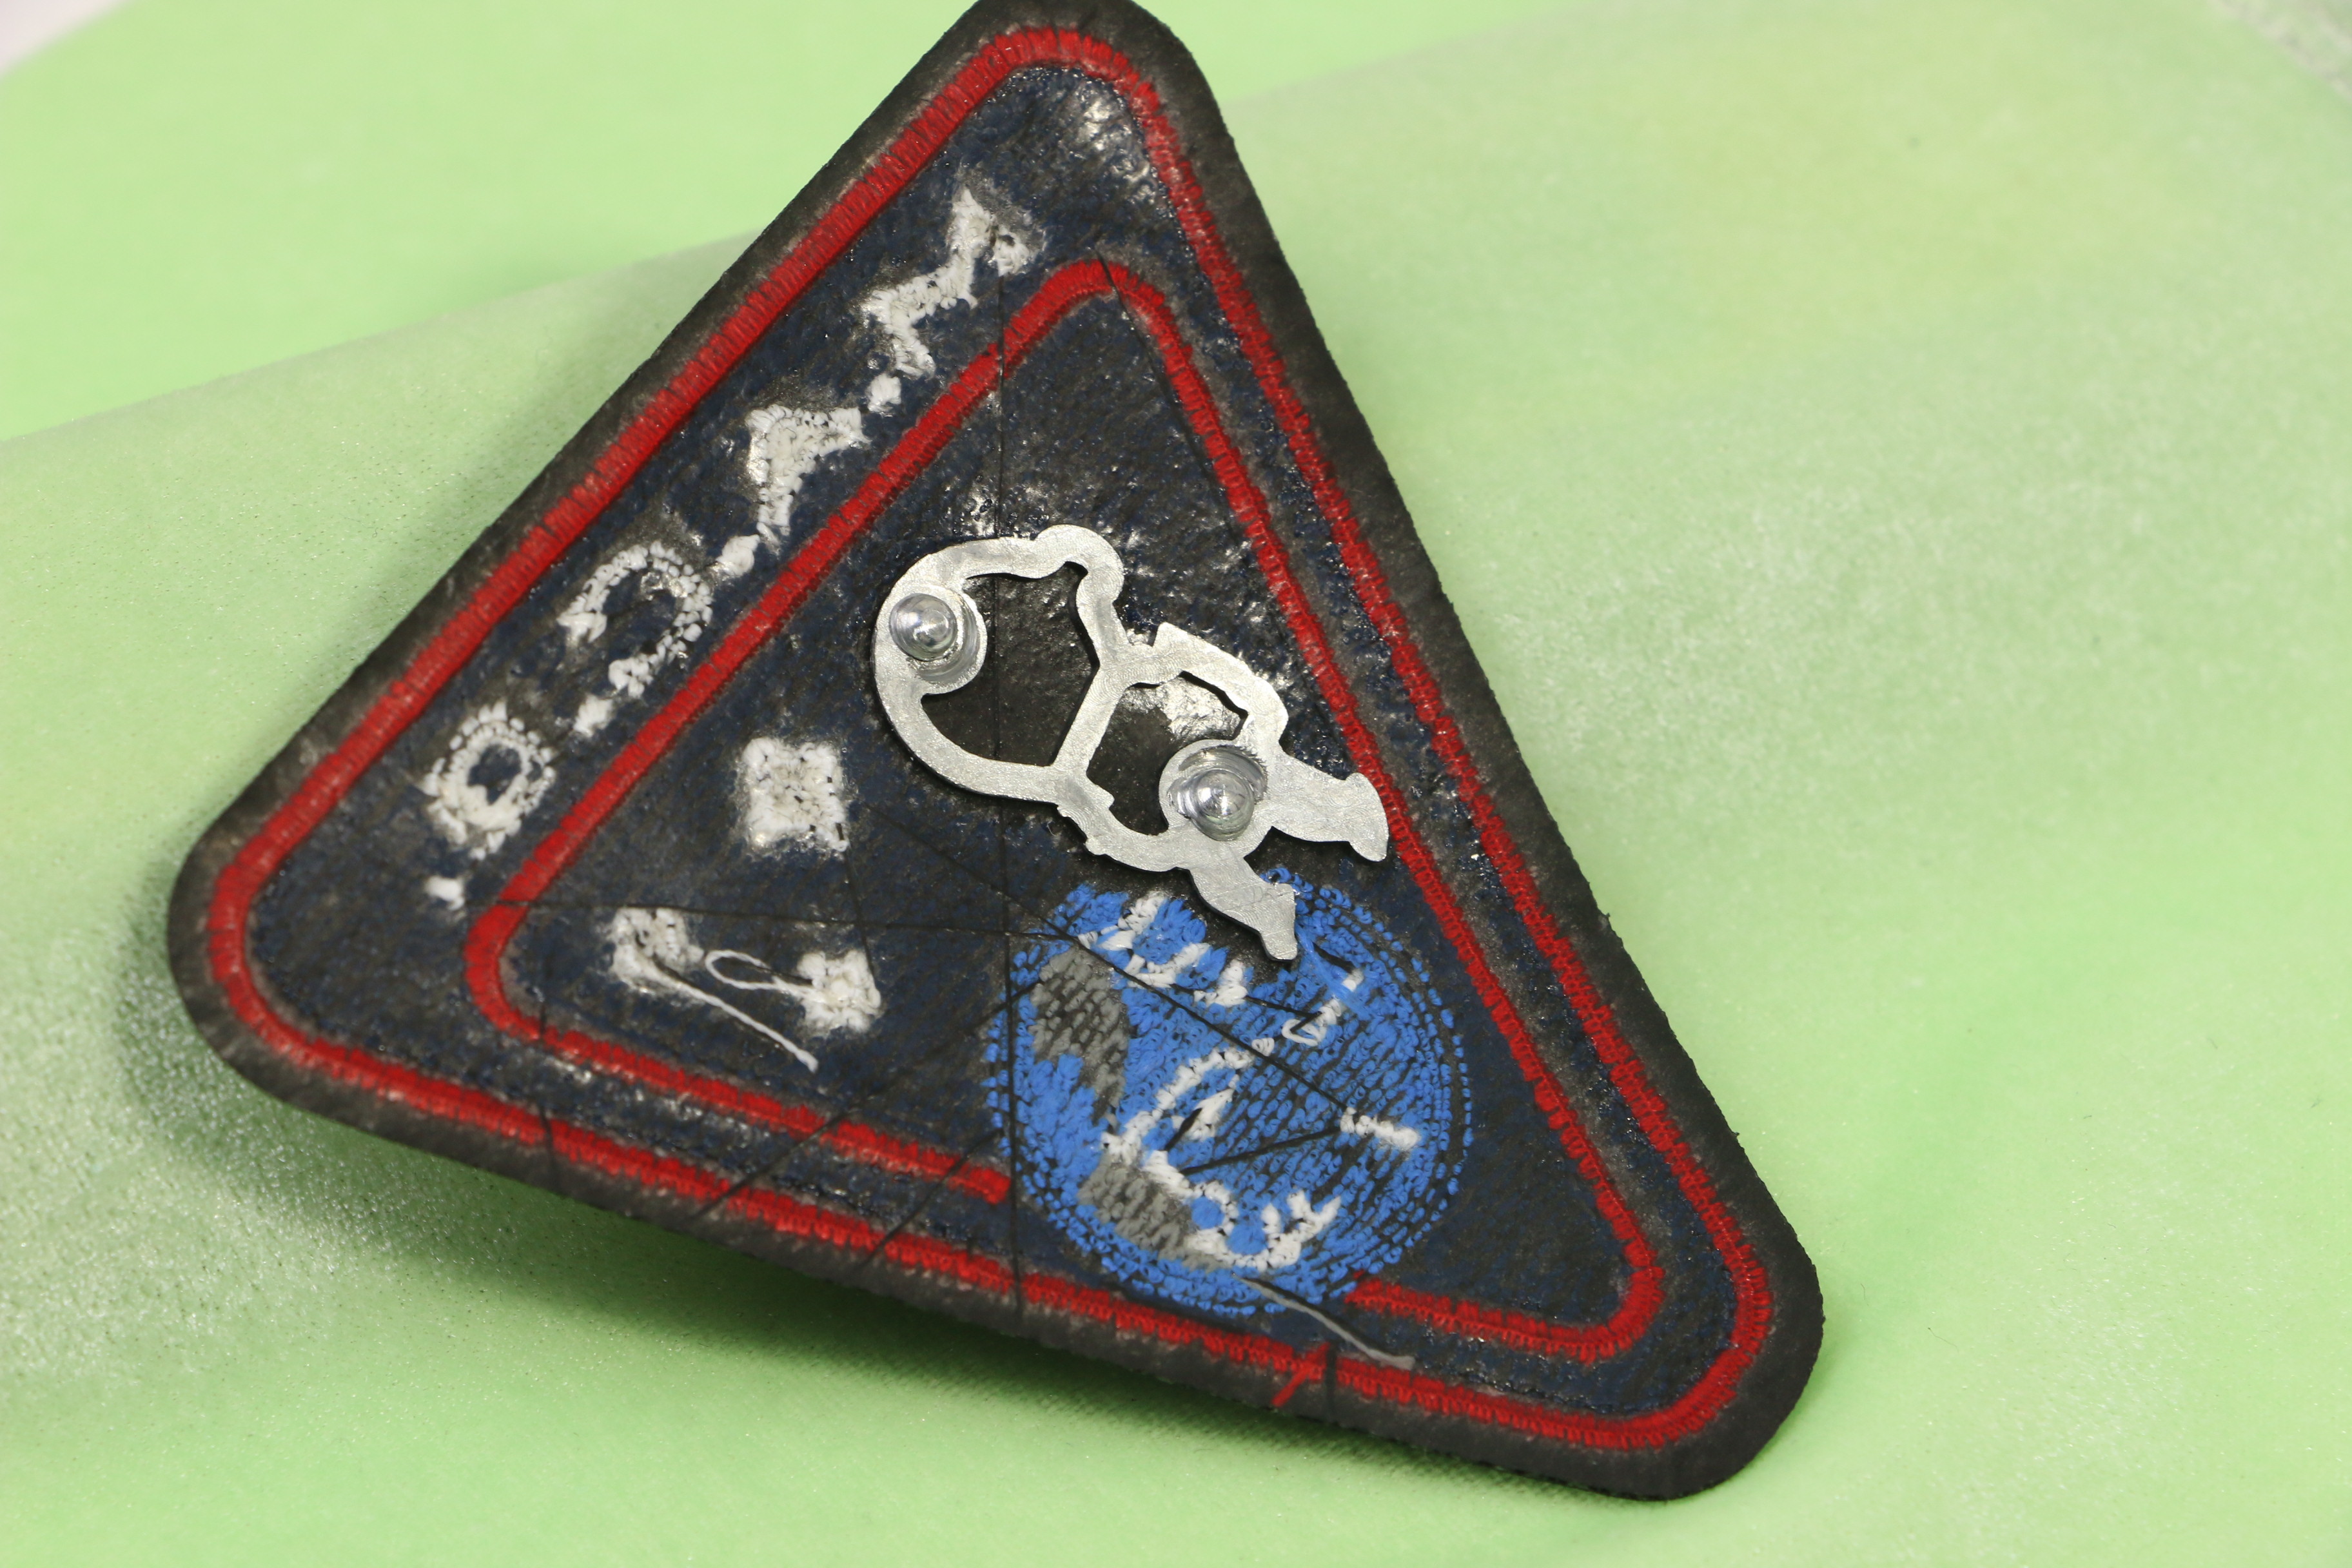  Soft Triangle Toothbrush Astronaut Patch For Iron On Or Sew On Cloth Caps Backpack Bag Manufactures